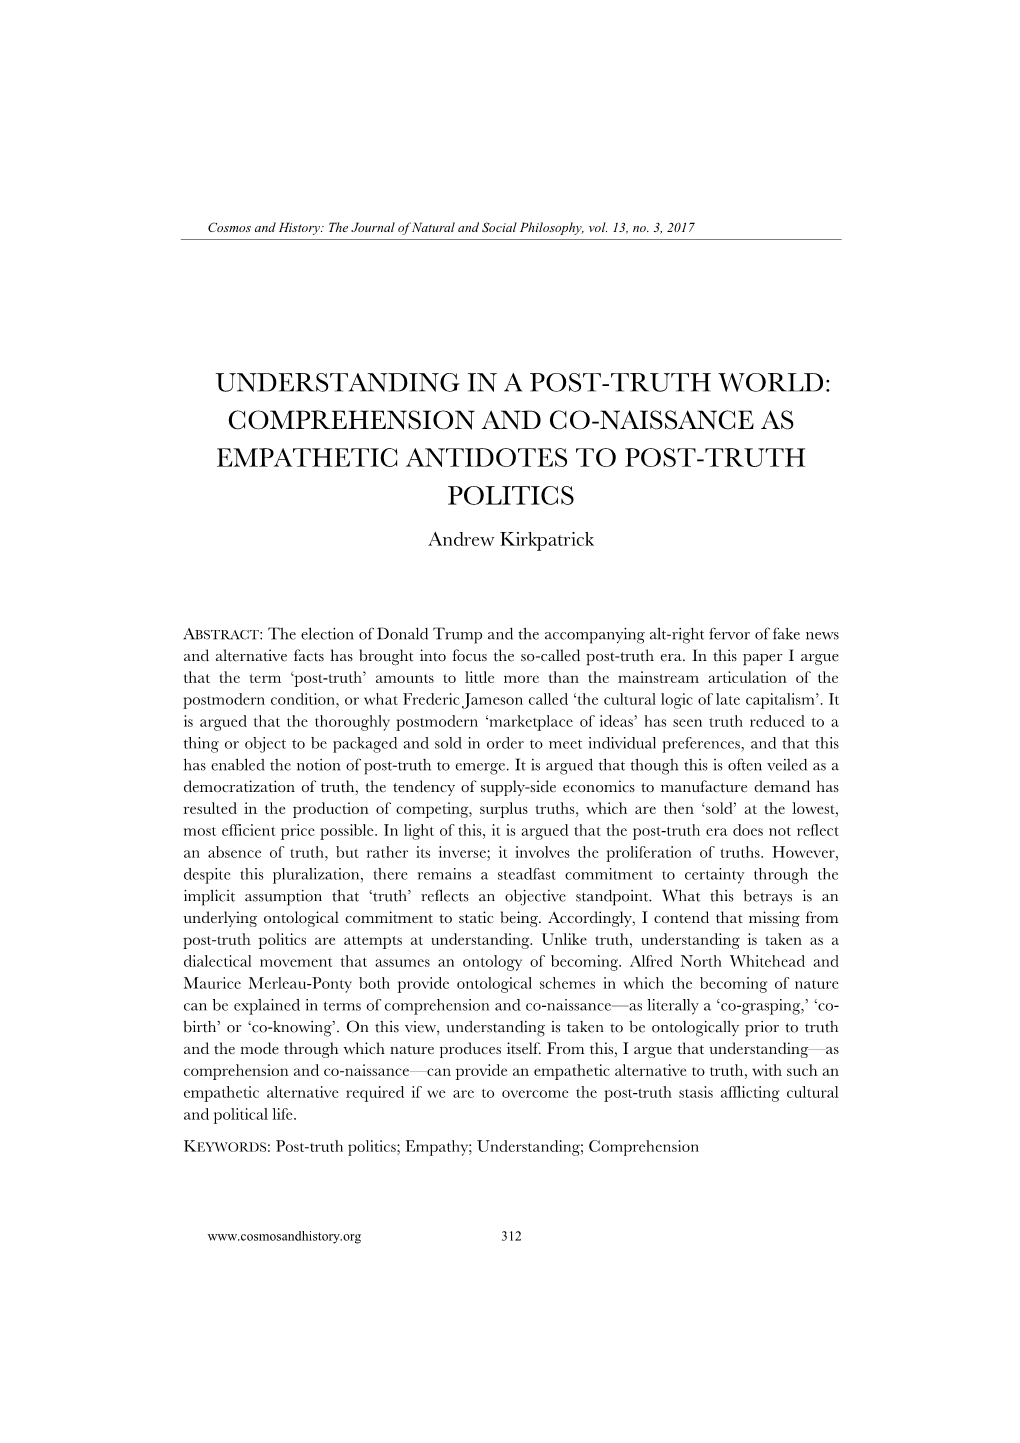 UNDERSTANDING in a POST-TRUTH WORLD: COMPREHENSION and CO-NAISSANCE AS EMPATHETIC ANTIDOTES to POST-TRUTH POLITICS Andrew Kirkpatrick